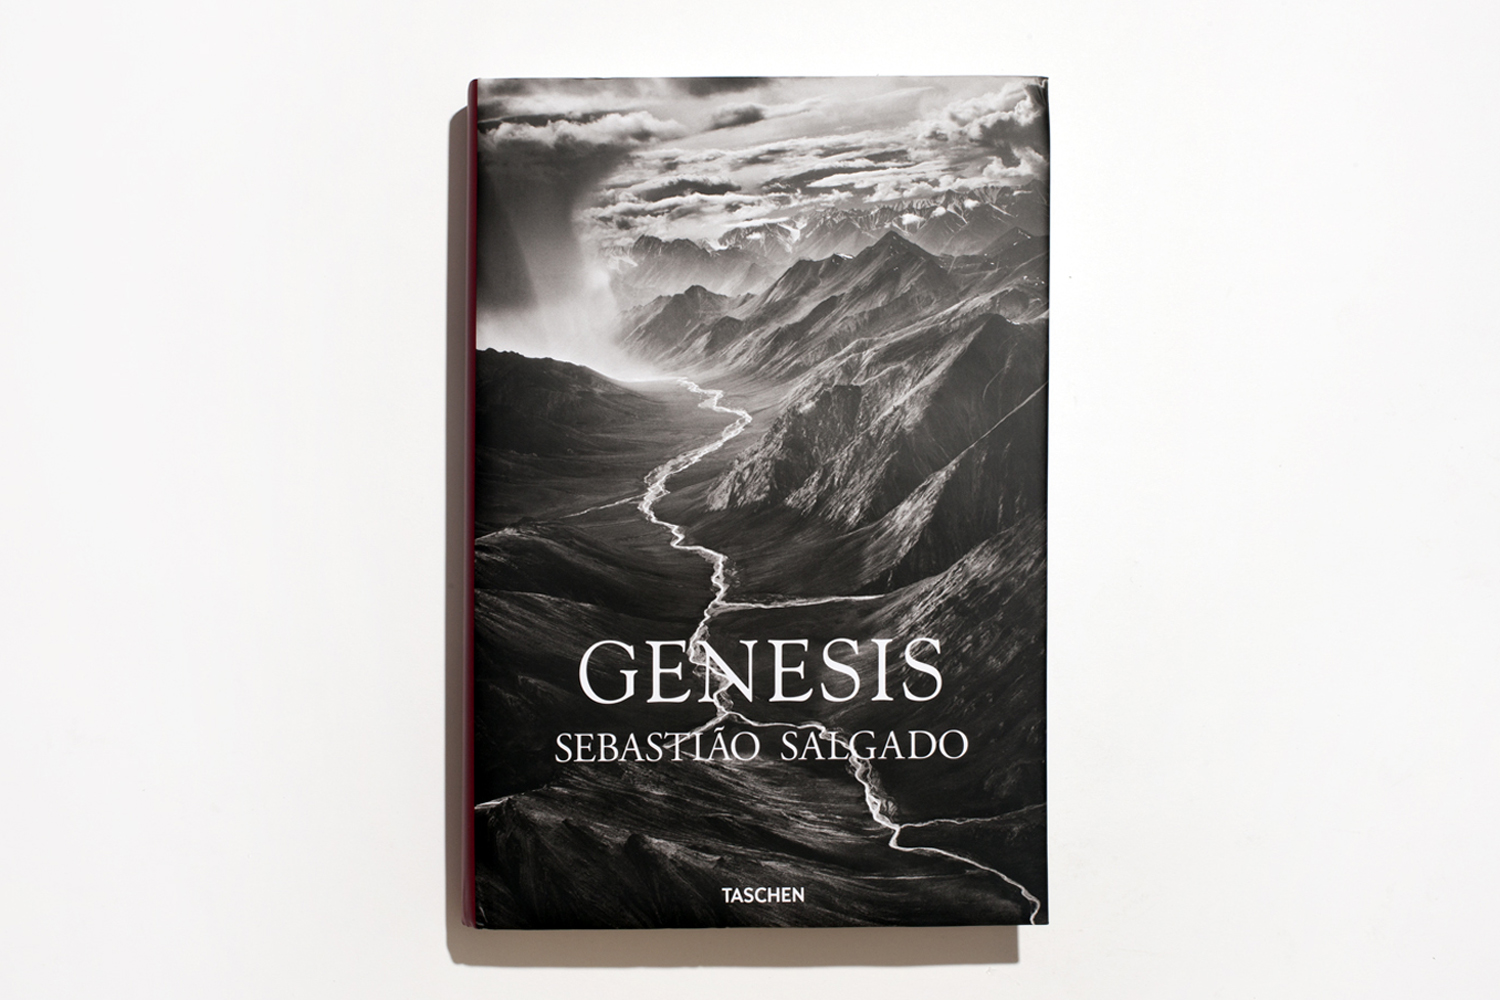 Genesis by Sebastião Salgado, published by Taschen, selected by Kira Pollack, director of photography at TIME.